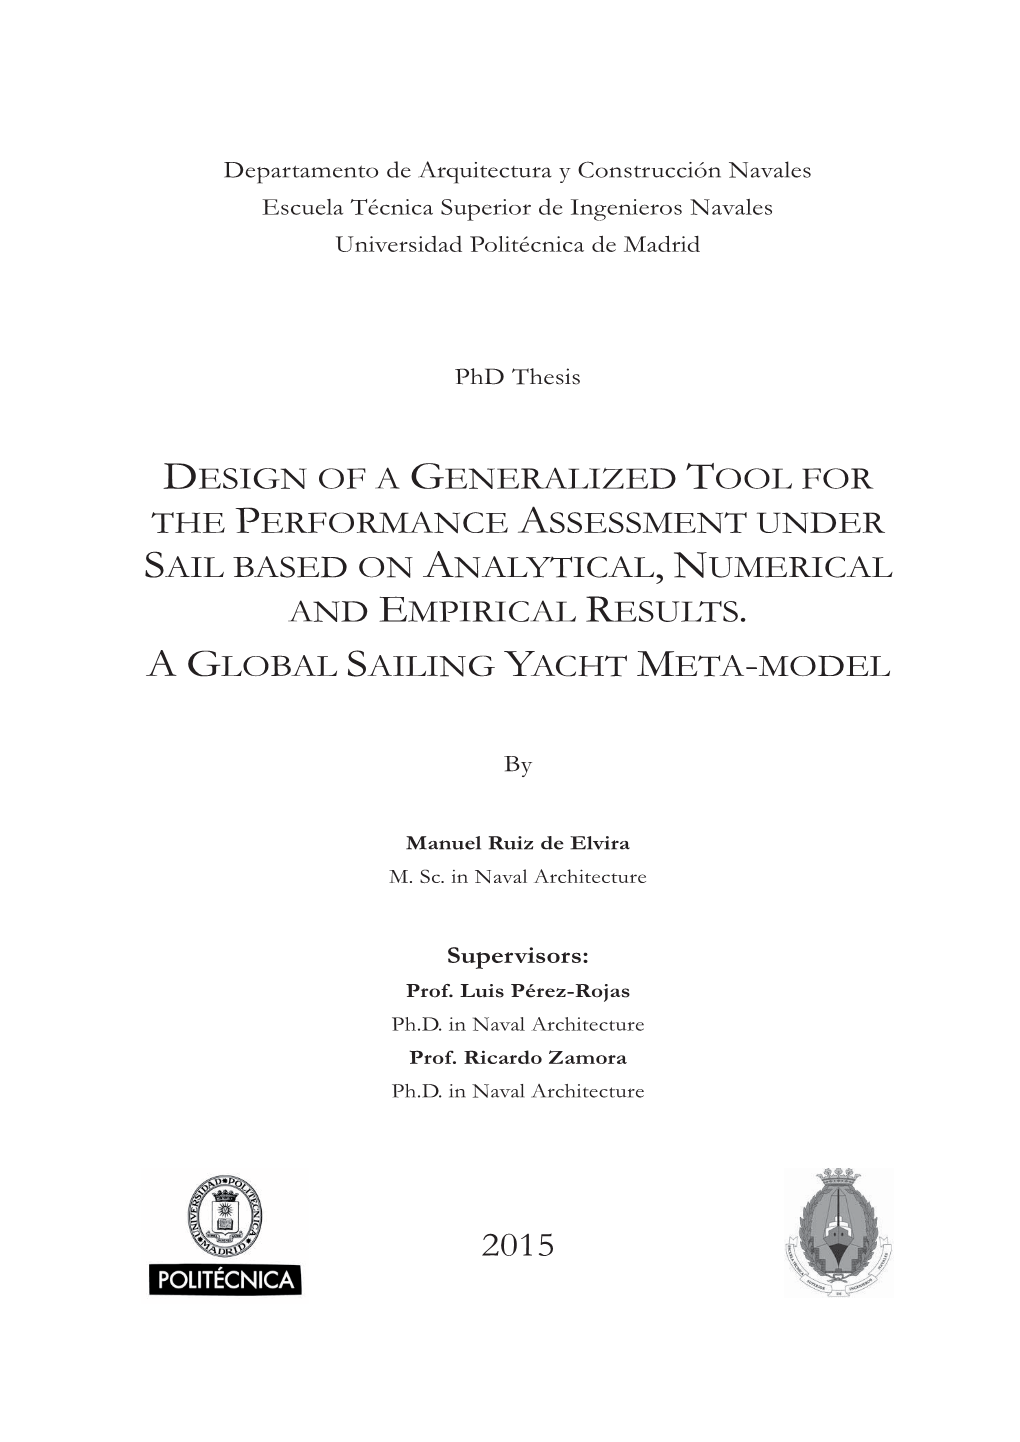 Design of a Generalized Tool for the Performance Assessment Under Sail Based on Analytical, Numerical and Empirical Results